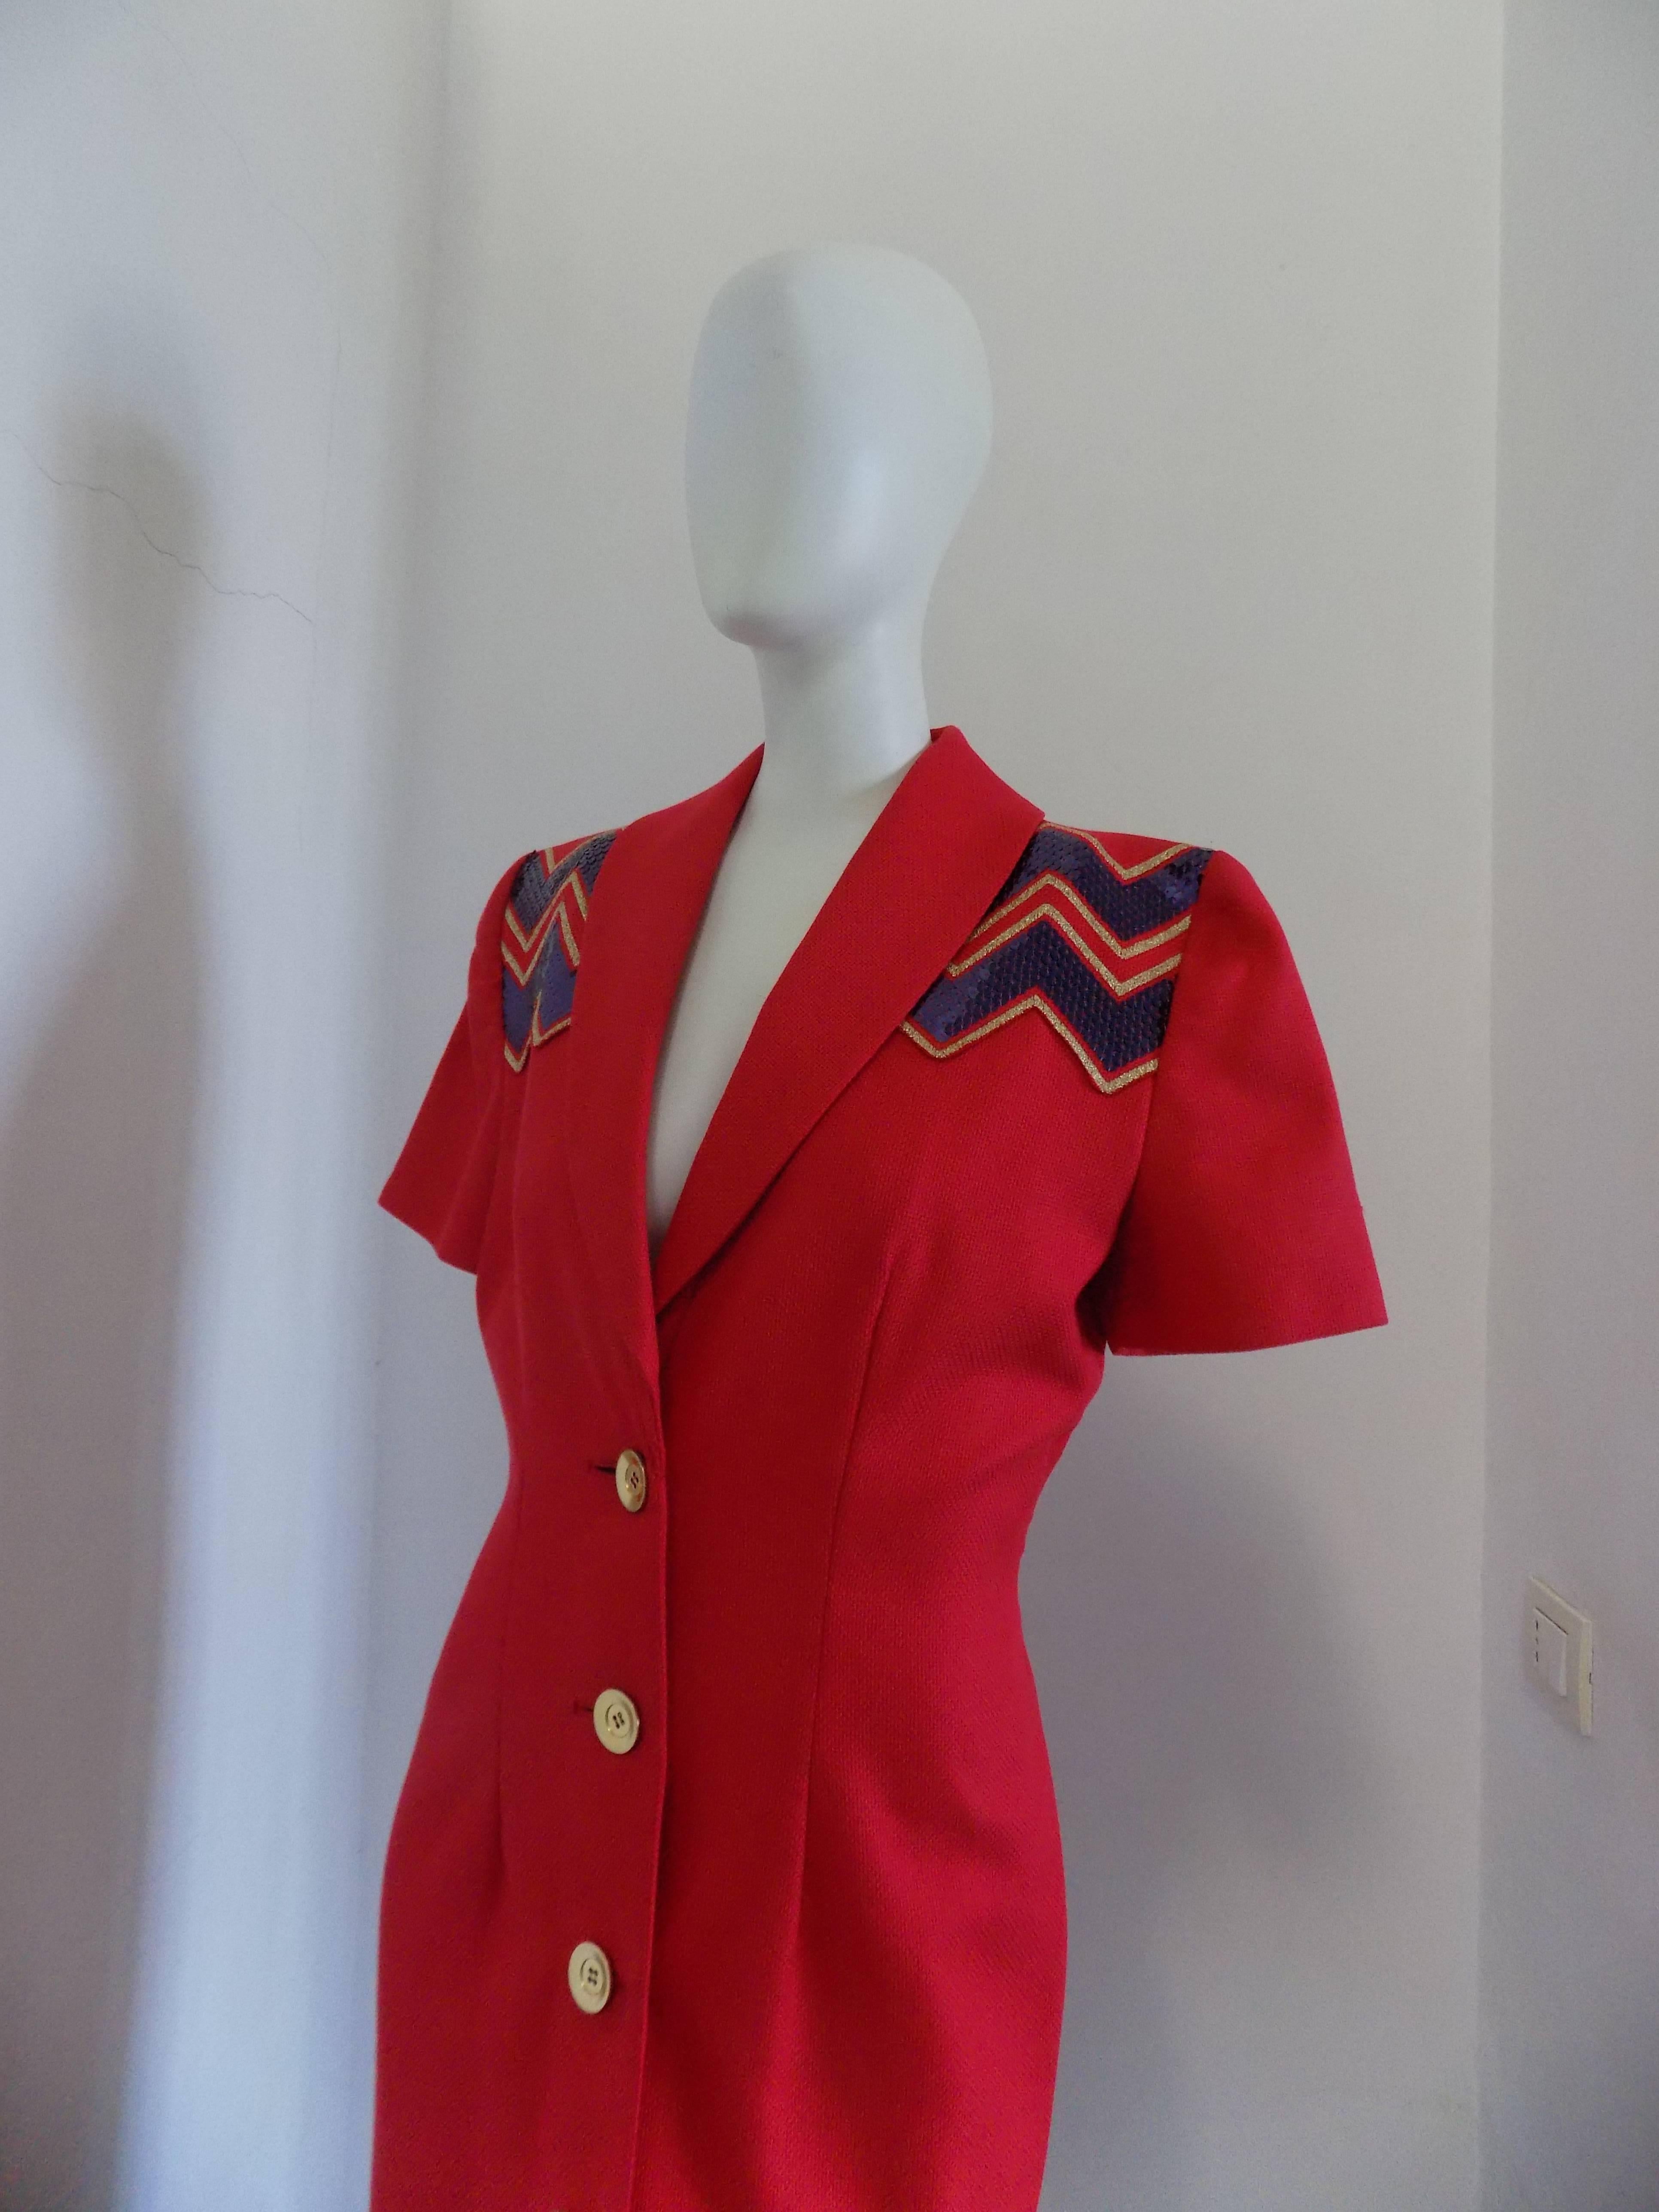 1980s Gai Mattiolo Couture Red Jacket blu sequins gold tone bottons
totally made in italy in 100% cotton
Italian size 44